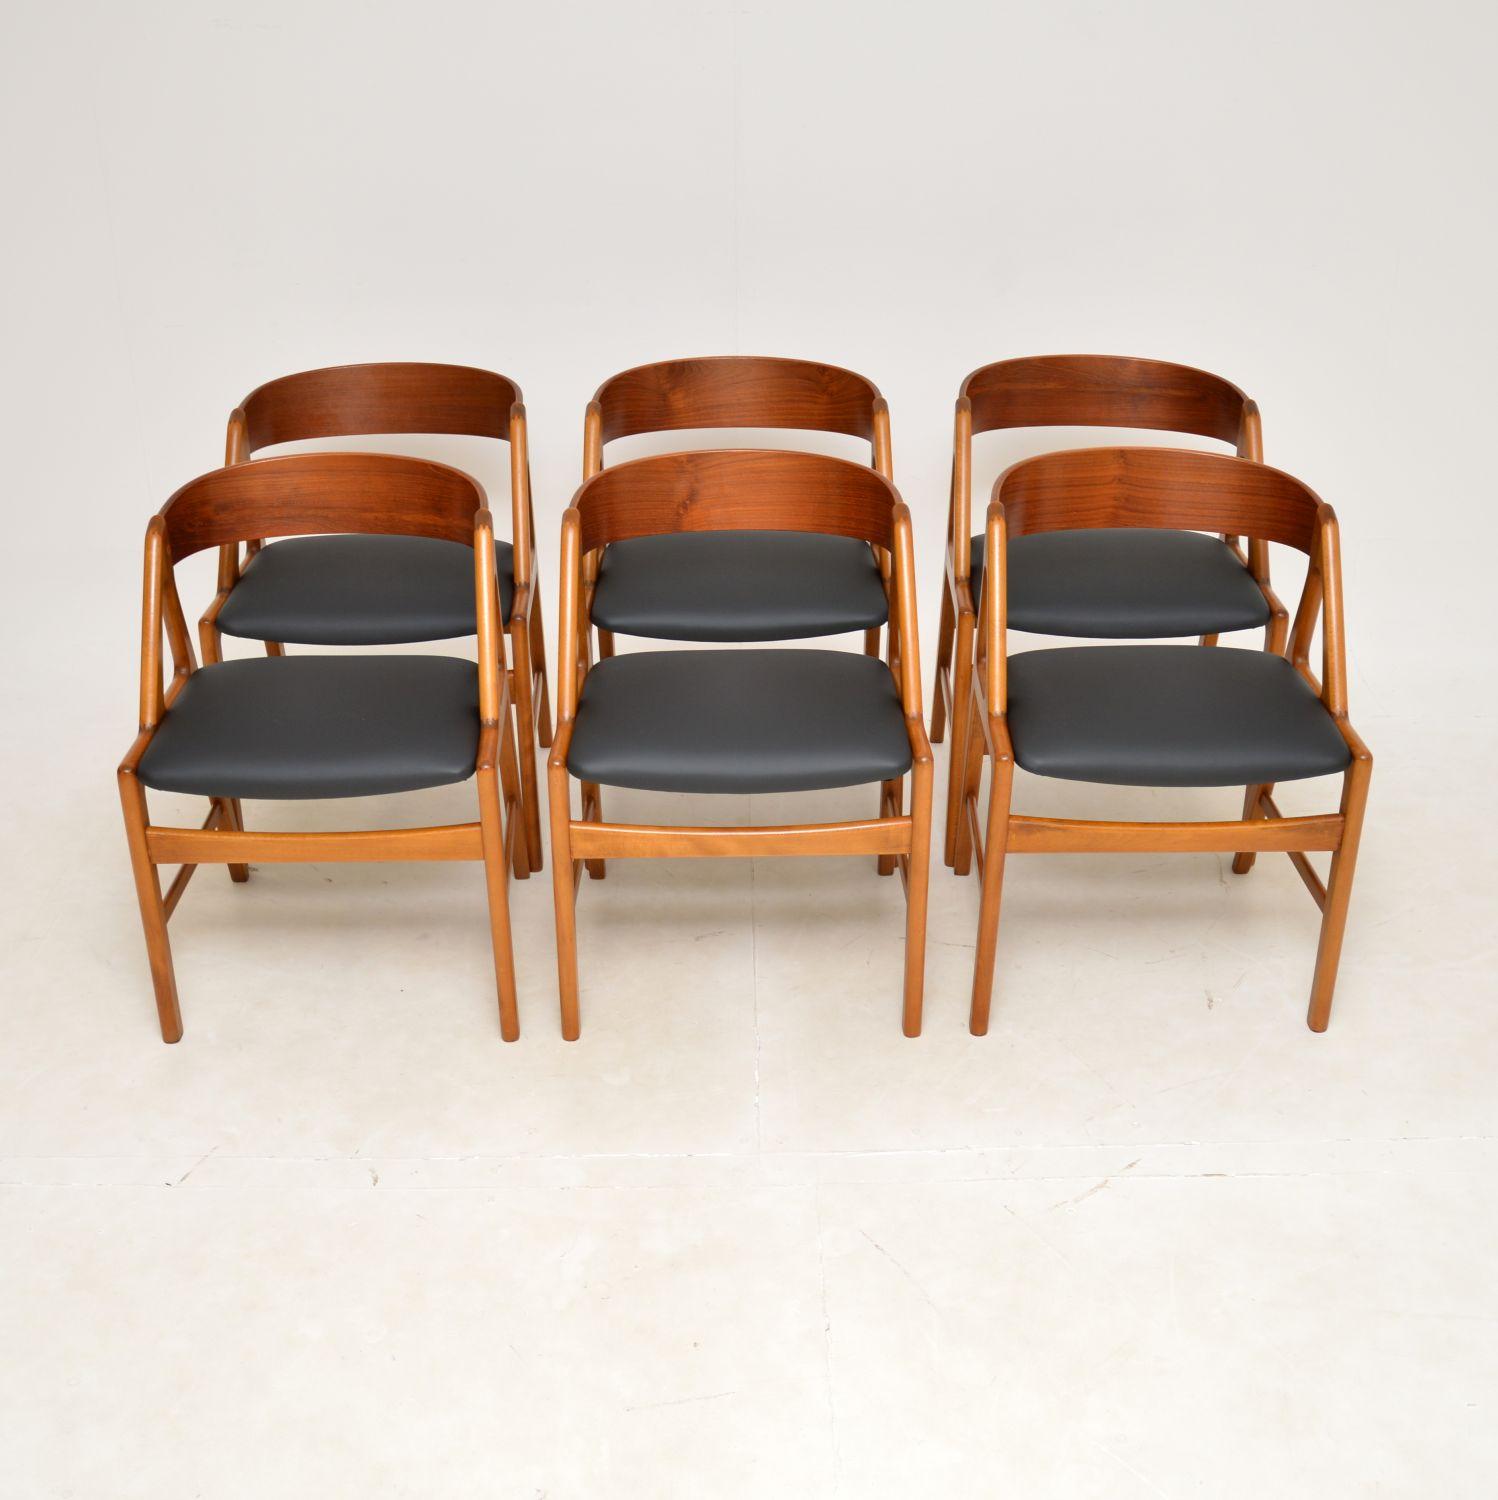 A stunning set of vintage Danish dining chairs. They were designed by Henning Kjaernulf, they date from the 1960’s.

The quality is outstanding, they have very well designed frames and are very comfortable. The back rests are beautifully curved